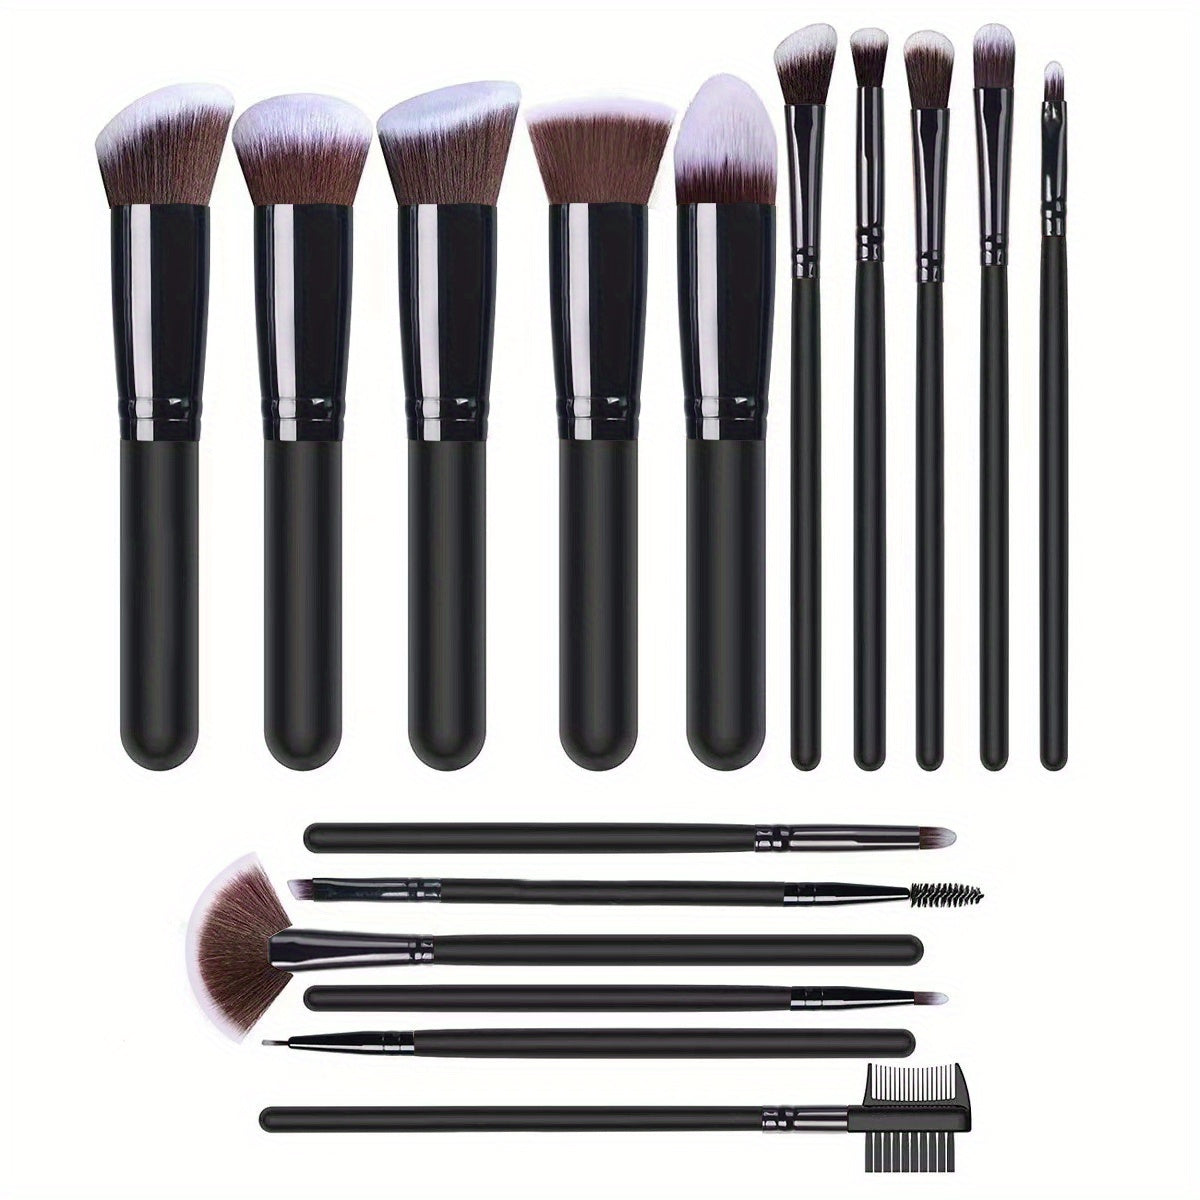 16 Pc Professional Synthetic Makeup Brushes Set in Black - Lincoln Values